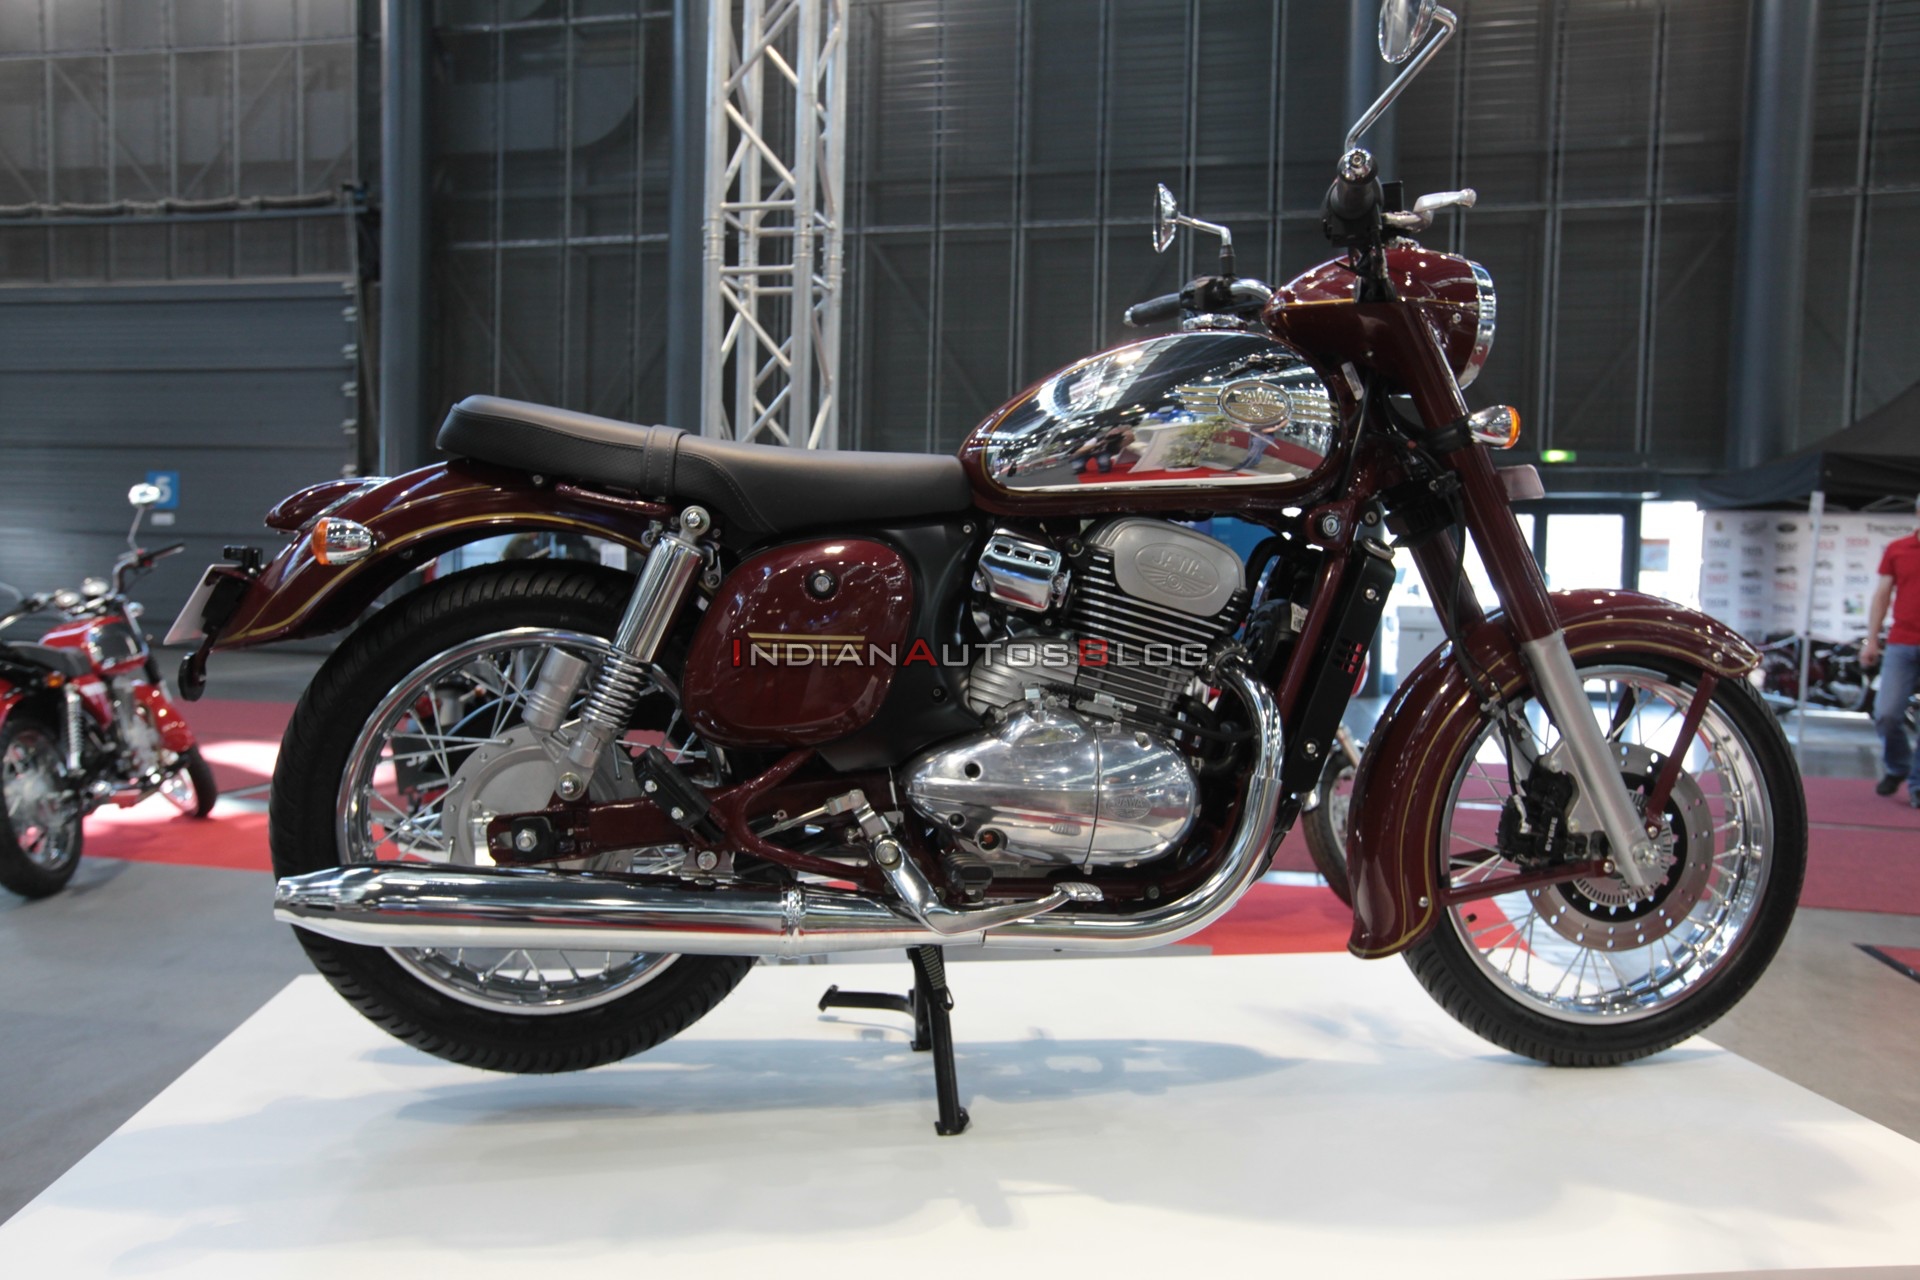 Jawa 300 Classic Showcased In Europe Ahead Of Launch This Year